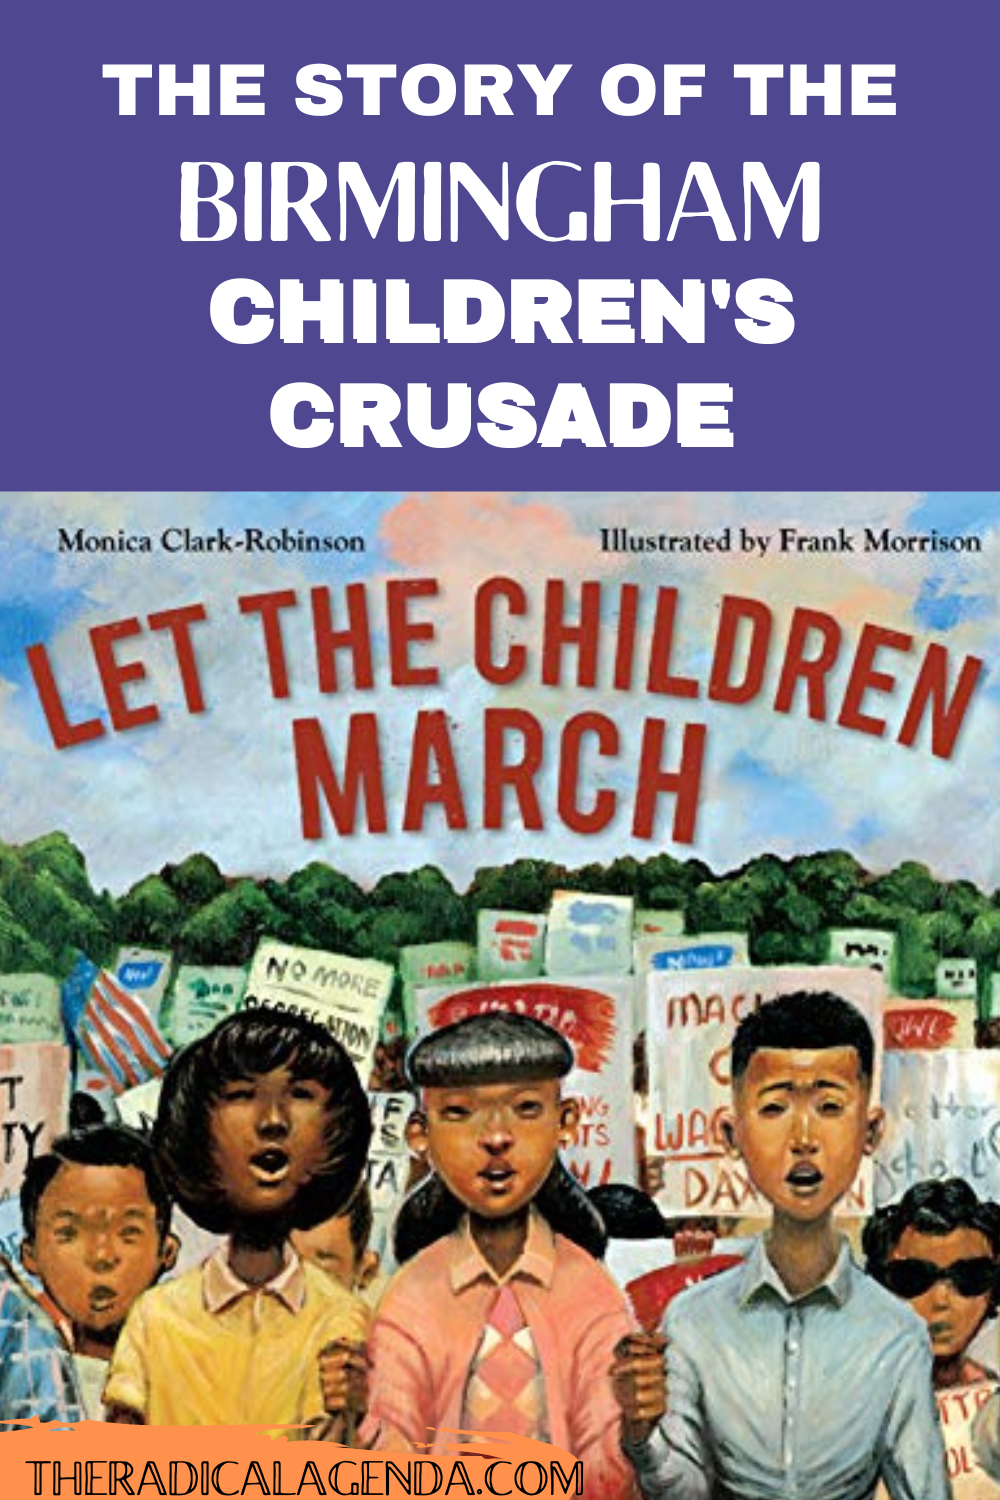 Let the Children March book about the 1963 Birmingham Children's Crusade